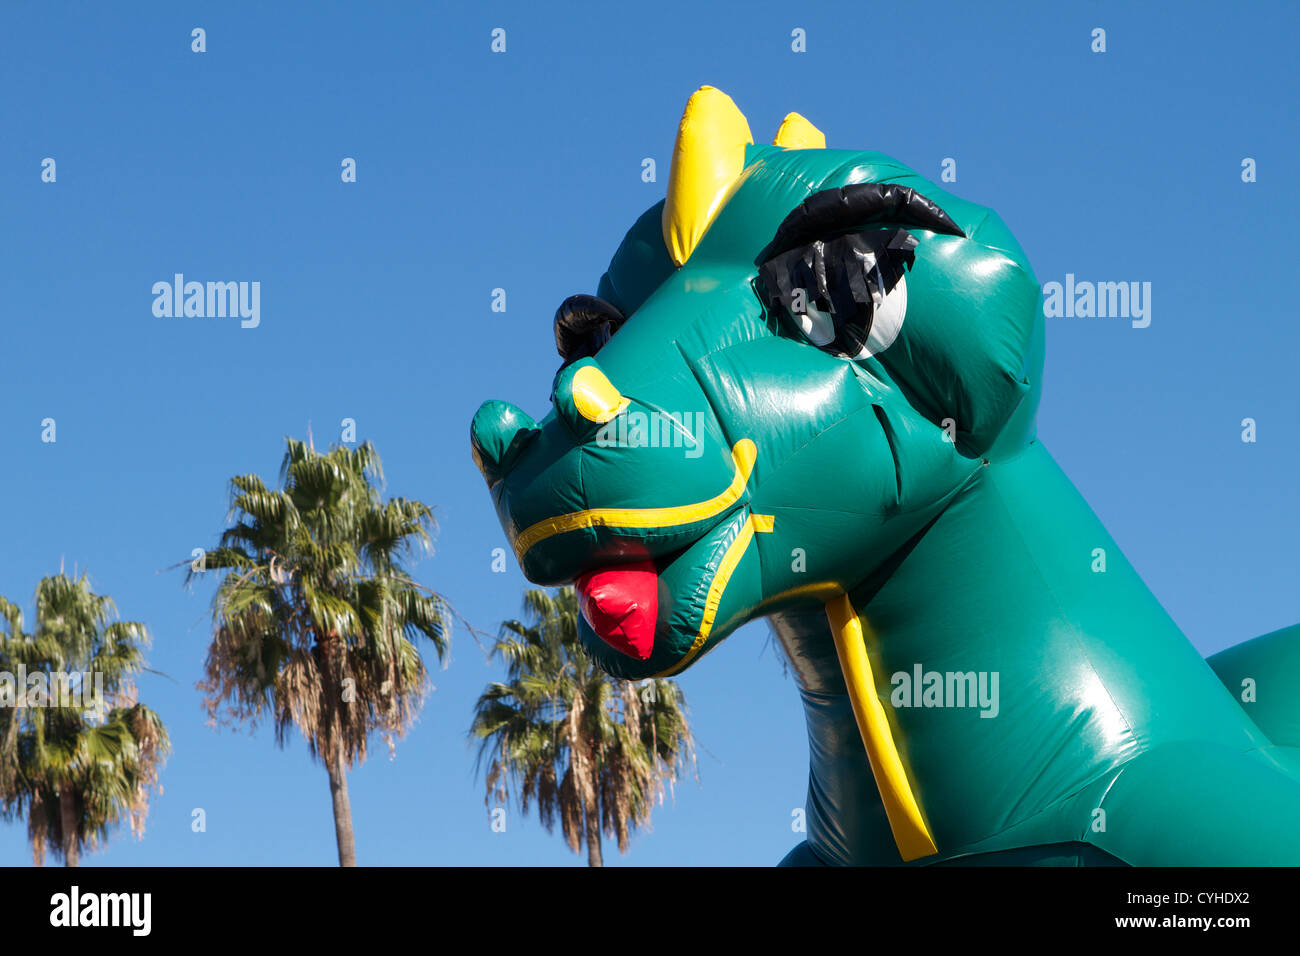 https://c8.alamy.com/comp/CYHDX2/a-green-inflatable-dinosaur-bouncy-play-toy-for-kids-in-southern-california-CYHDX2.jpg